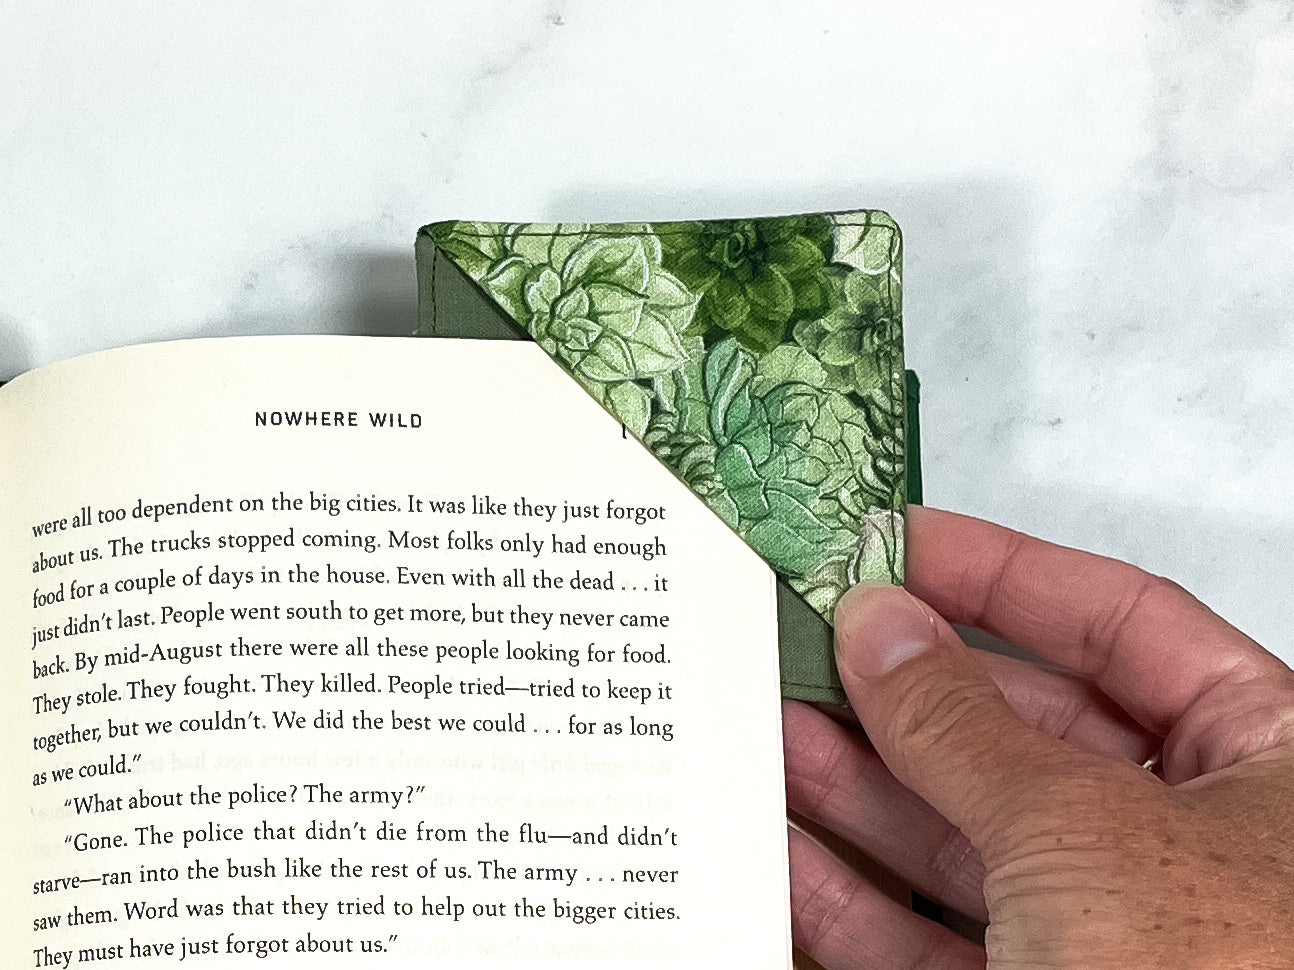 A handmade corner bookmark made from a fun succulent plant themed cotton fabric in shades of green.  The page marker is square and is being shown sliding over the corner of a page in a book.